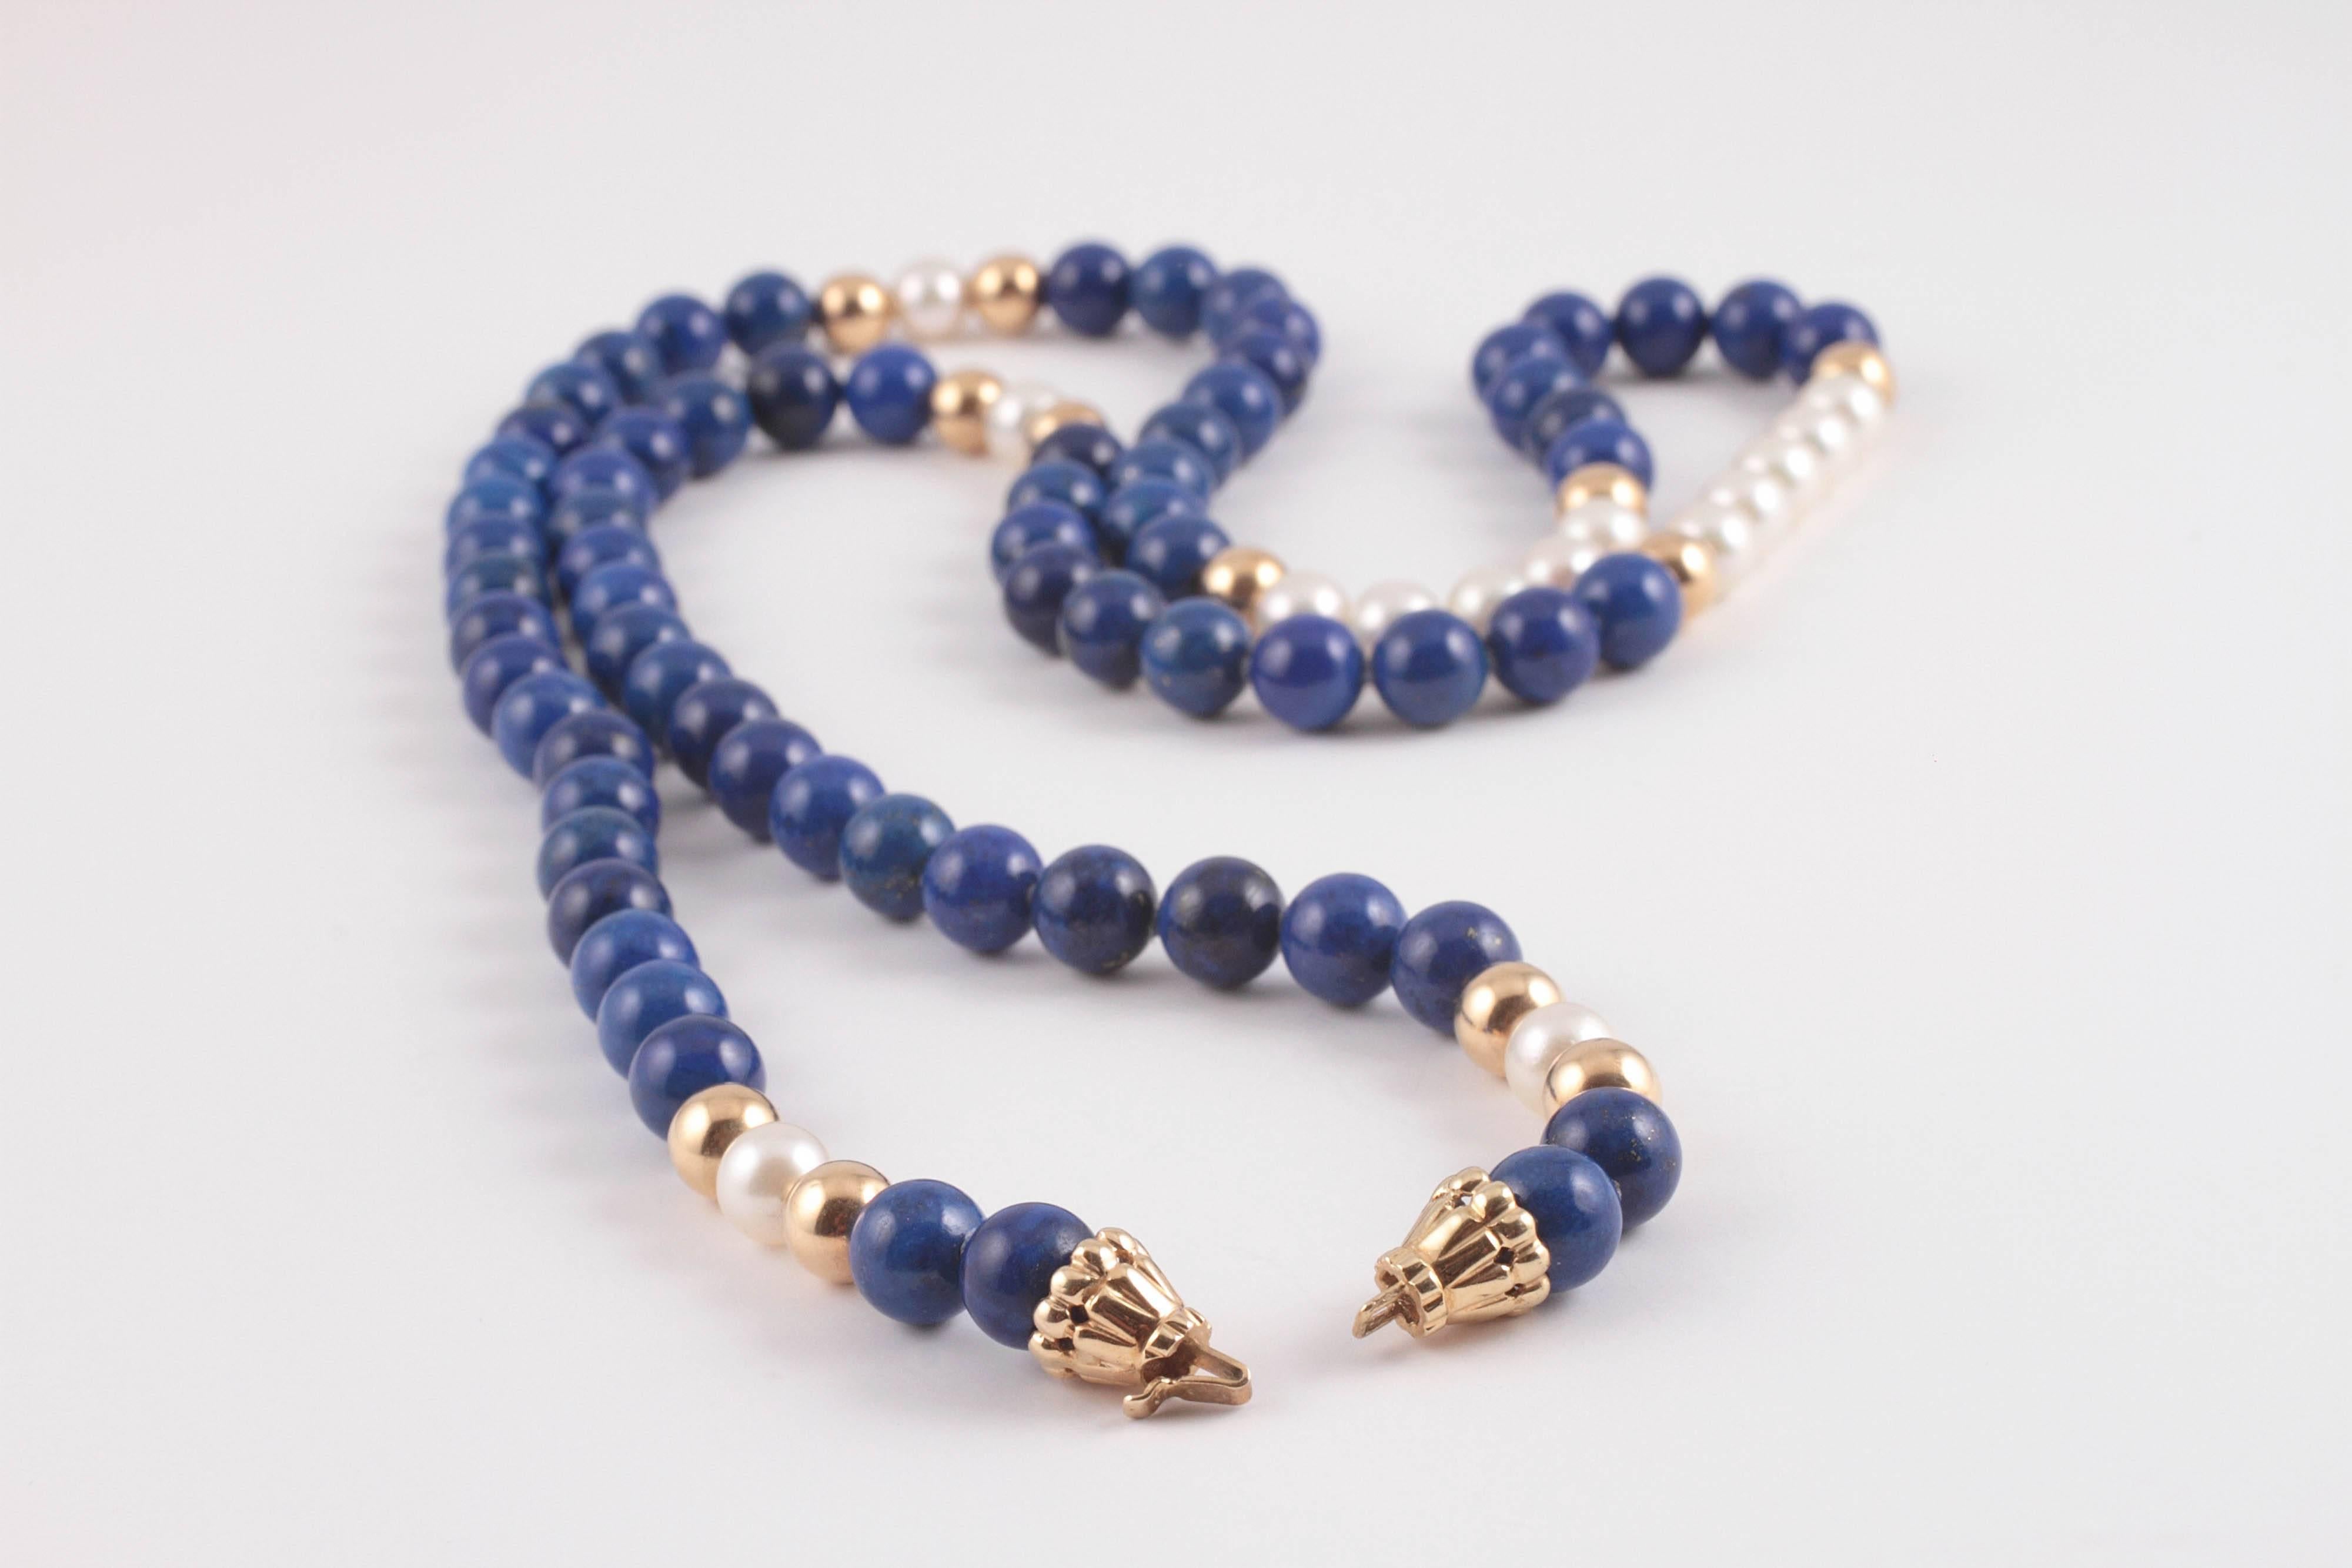 pearl and lapis necklace